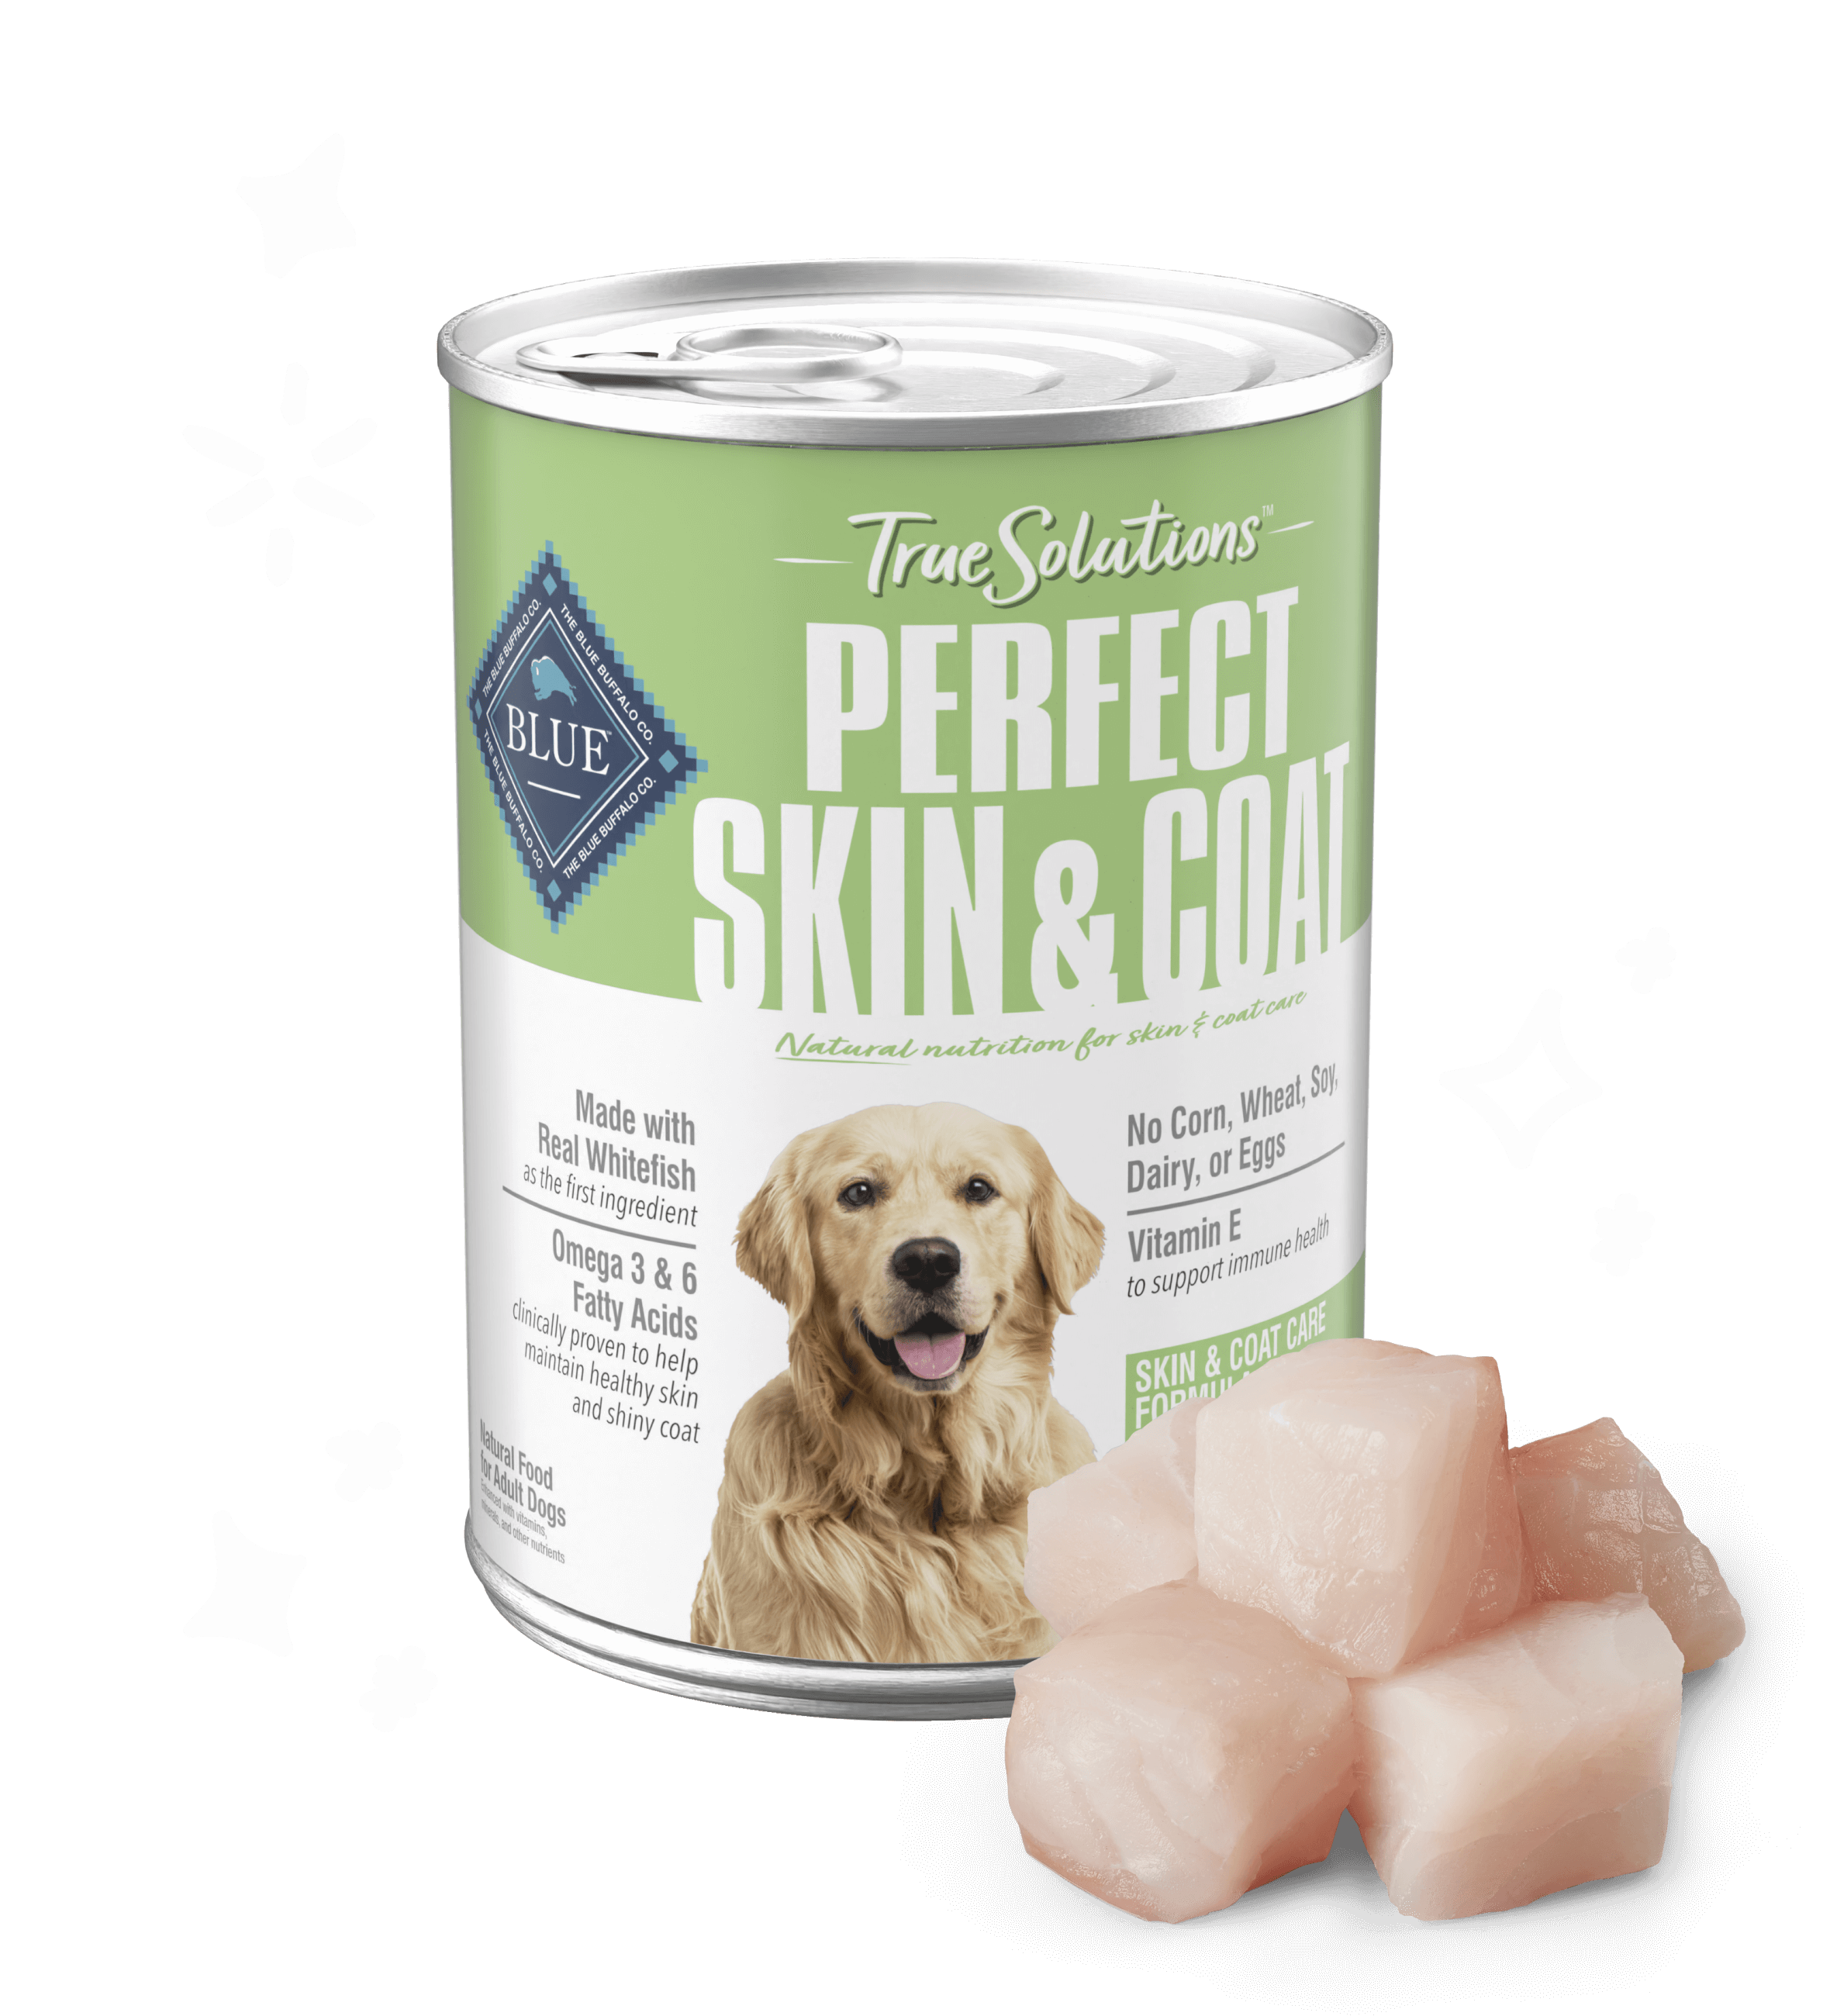 Blue true solutions perfect skin & coat care dog wet food